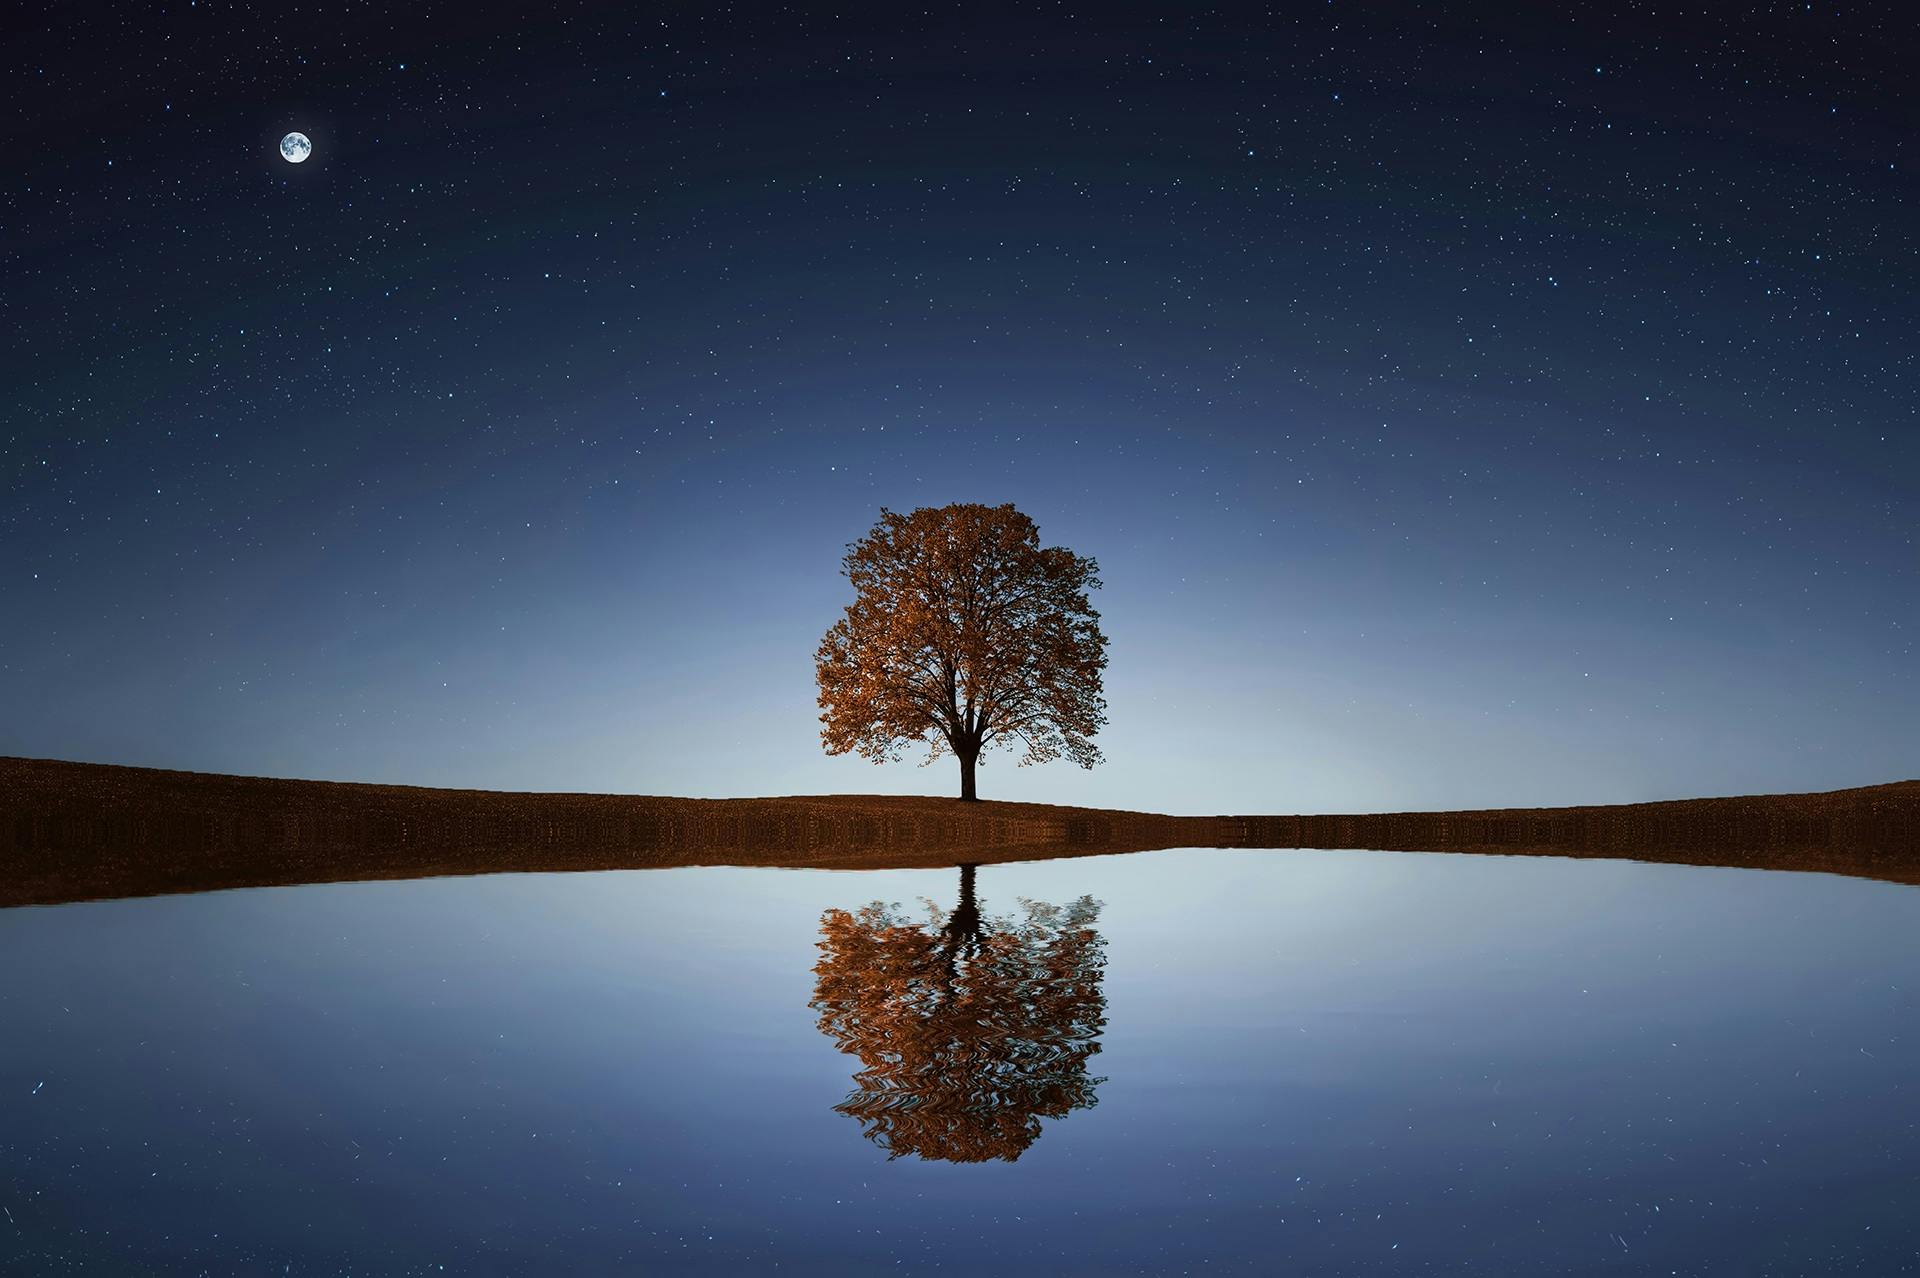 Tranquil tree reflection starry night